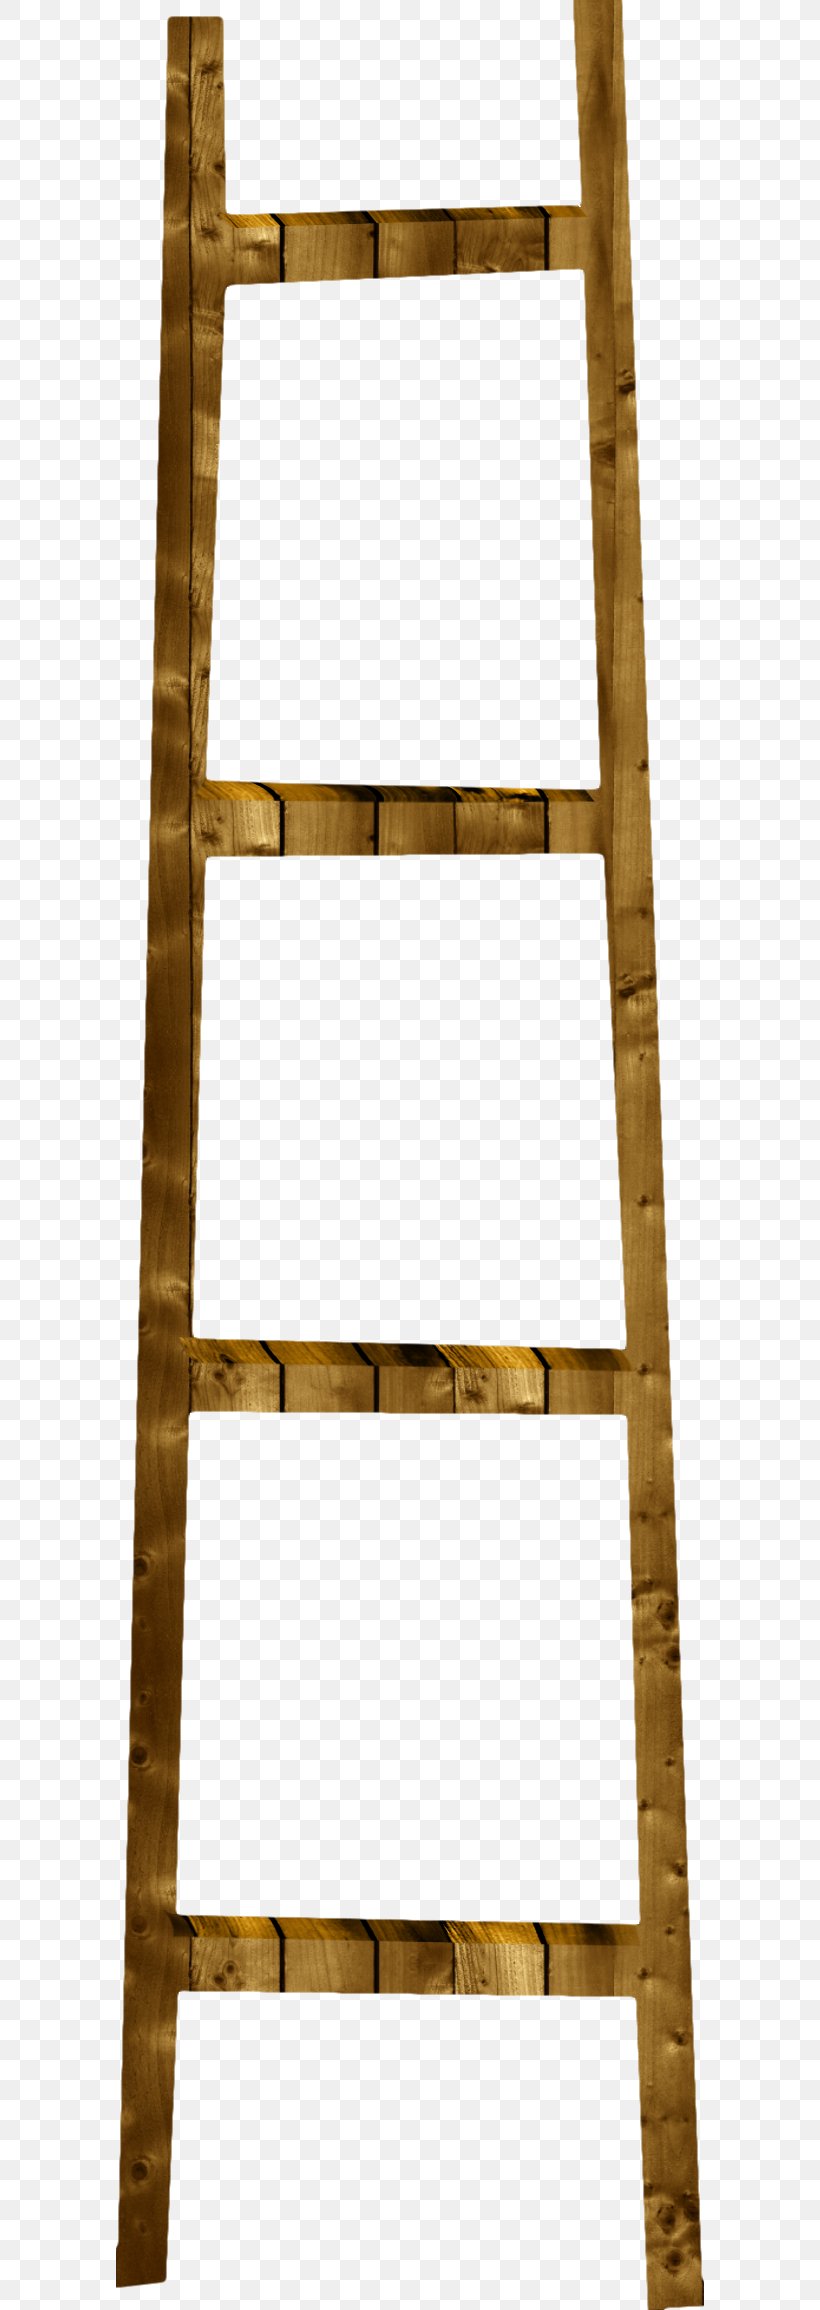 Wood Ladder Stairs, PNG, 588x2310px, Wood, Creative Ladder, Floor, Ladder, Material Download Free